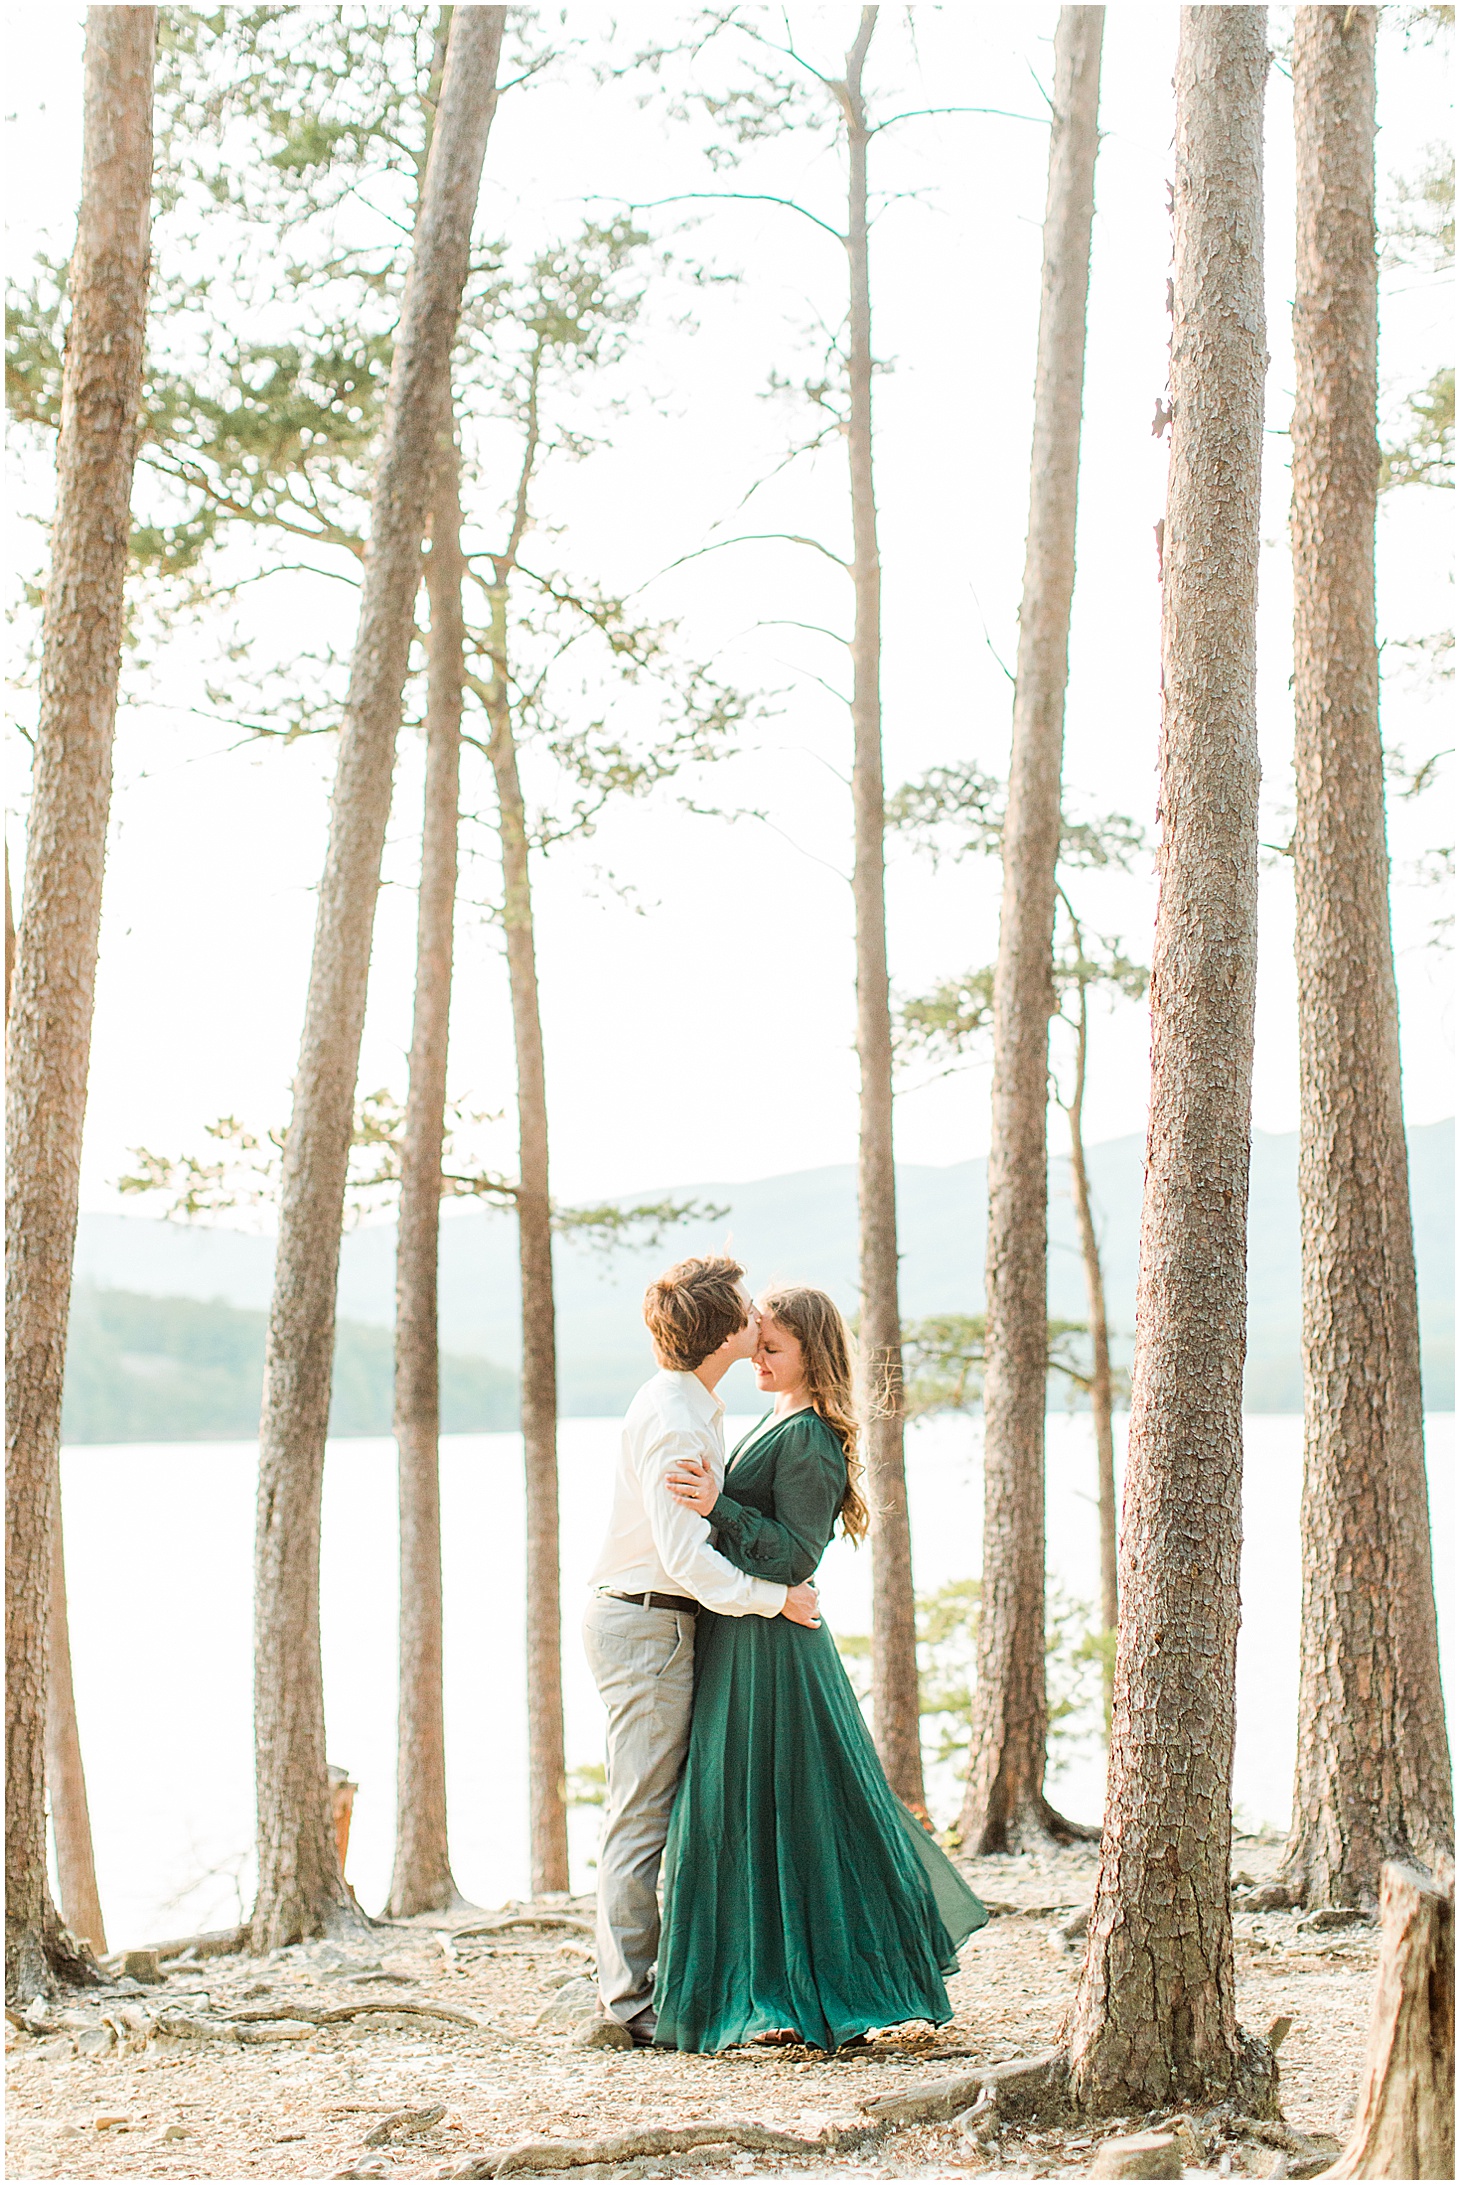 carvinscoveengagementsession_roanokeengagementsession_carvinscove_virginiawedding_virginiaweddingphotographer_vaweddingphotographer_photo_0055.jpg